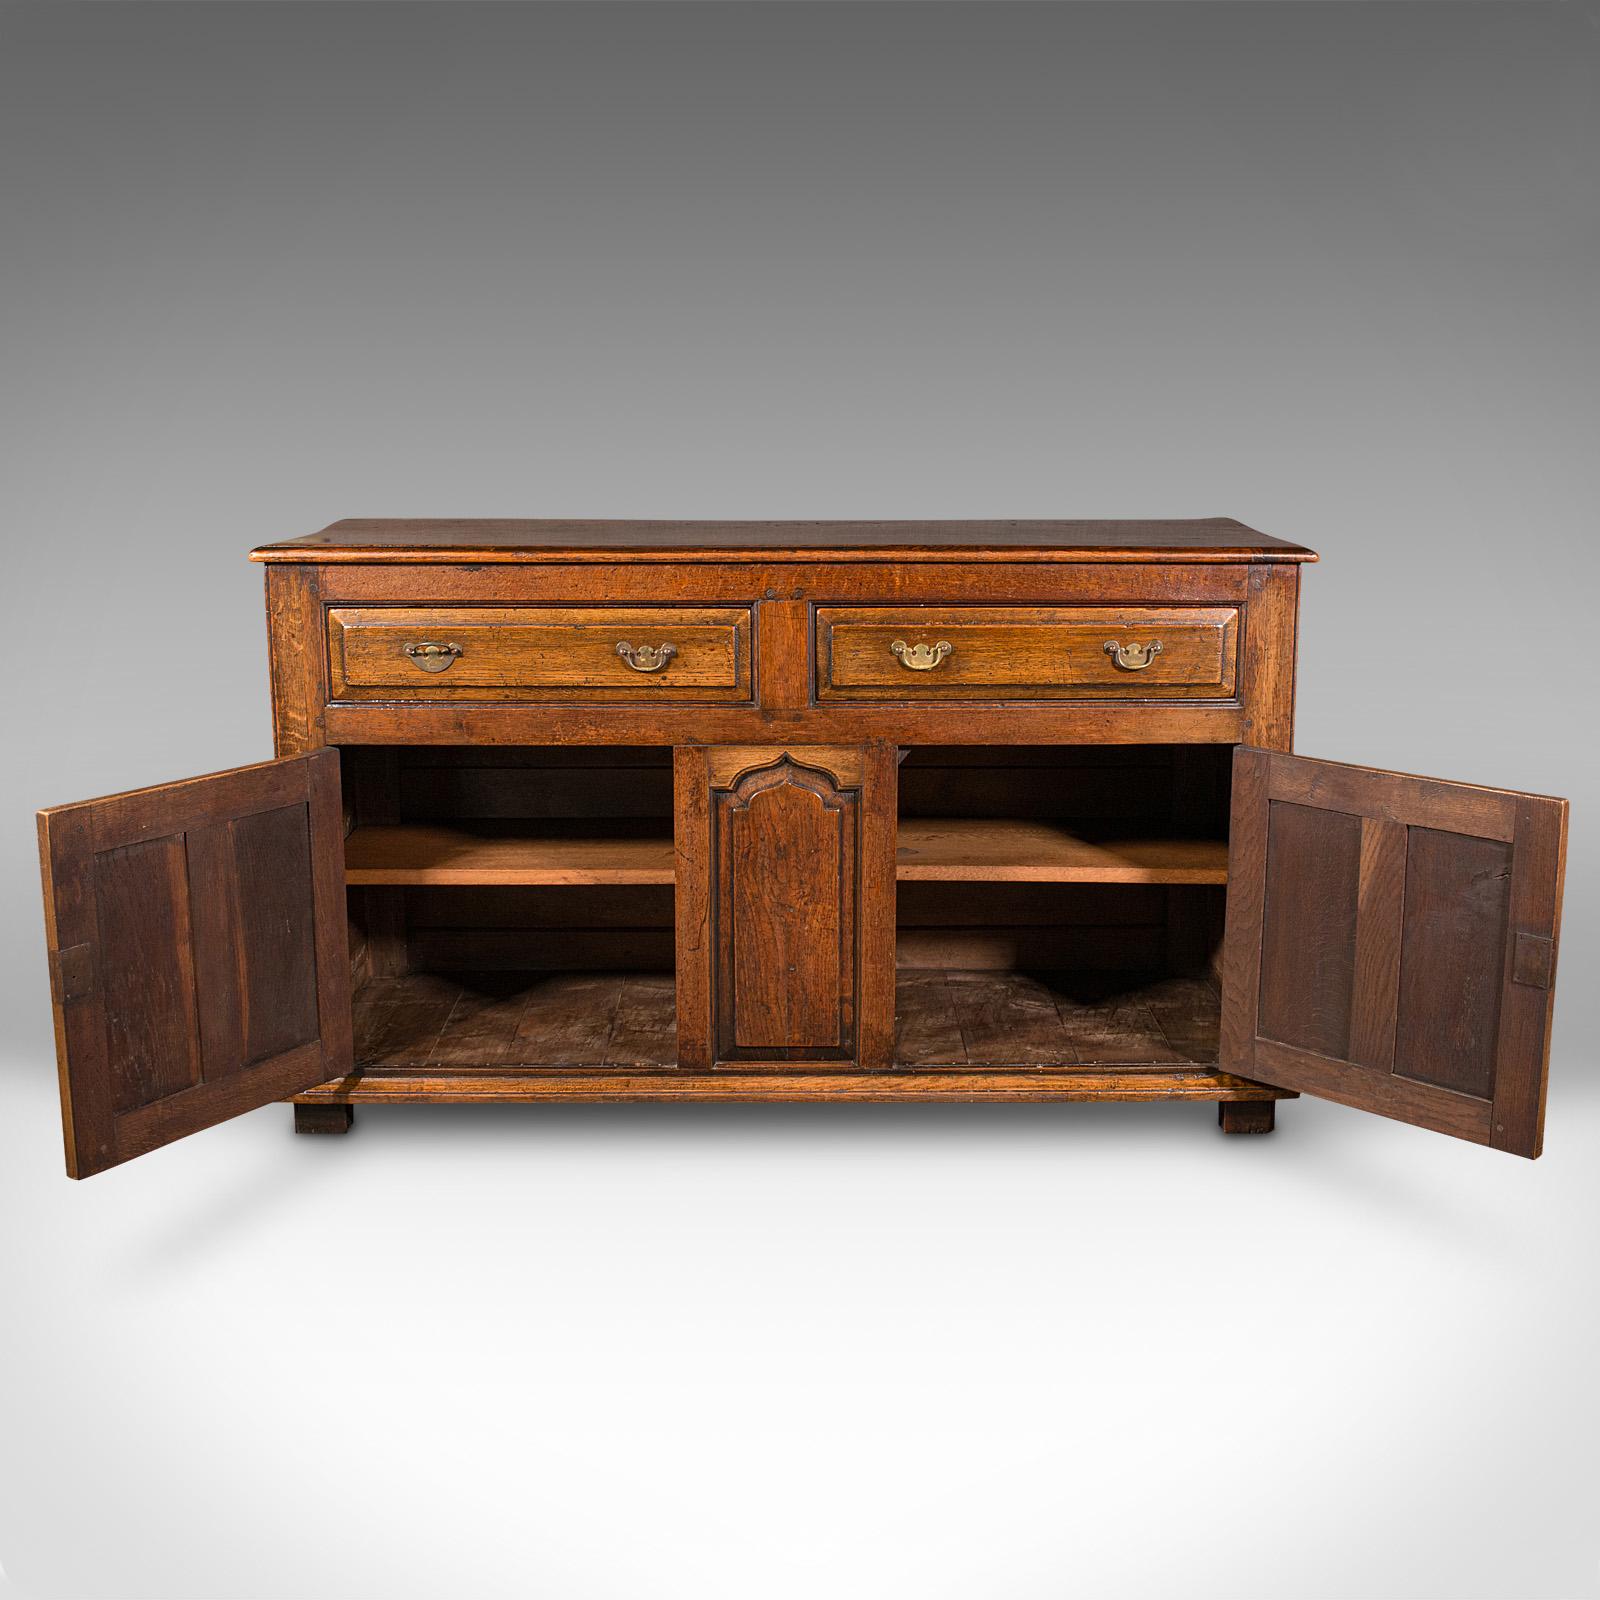 British Antique Country Housekeeper's Cabinet, English Oak, Dresser Base, Georgian, 1800 For Sale